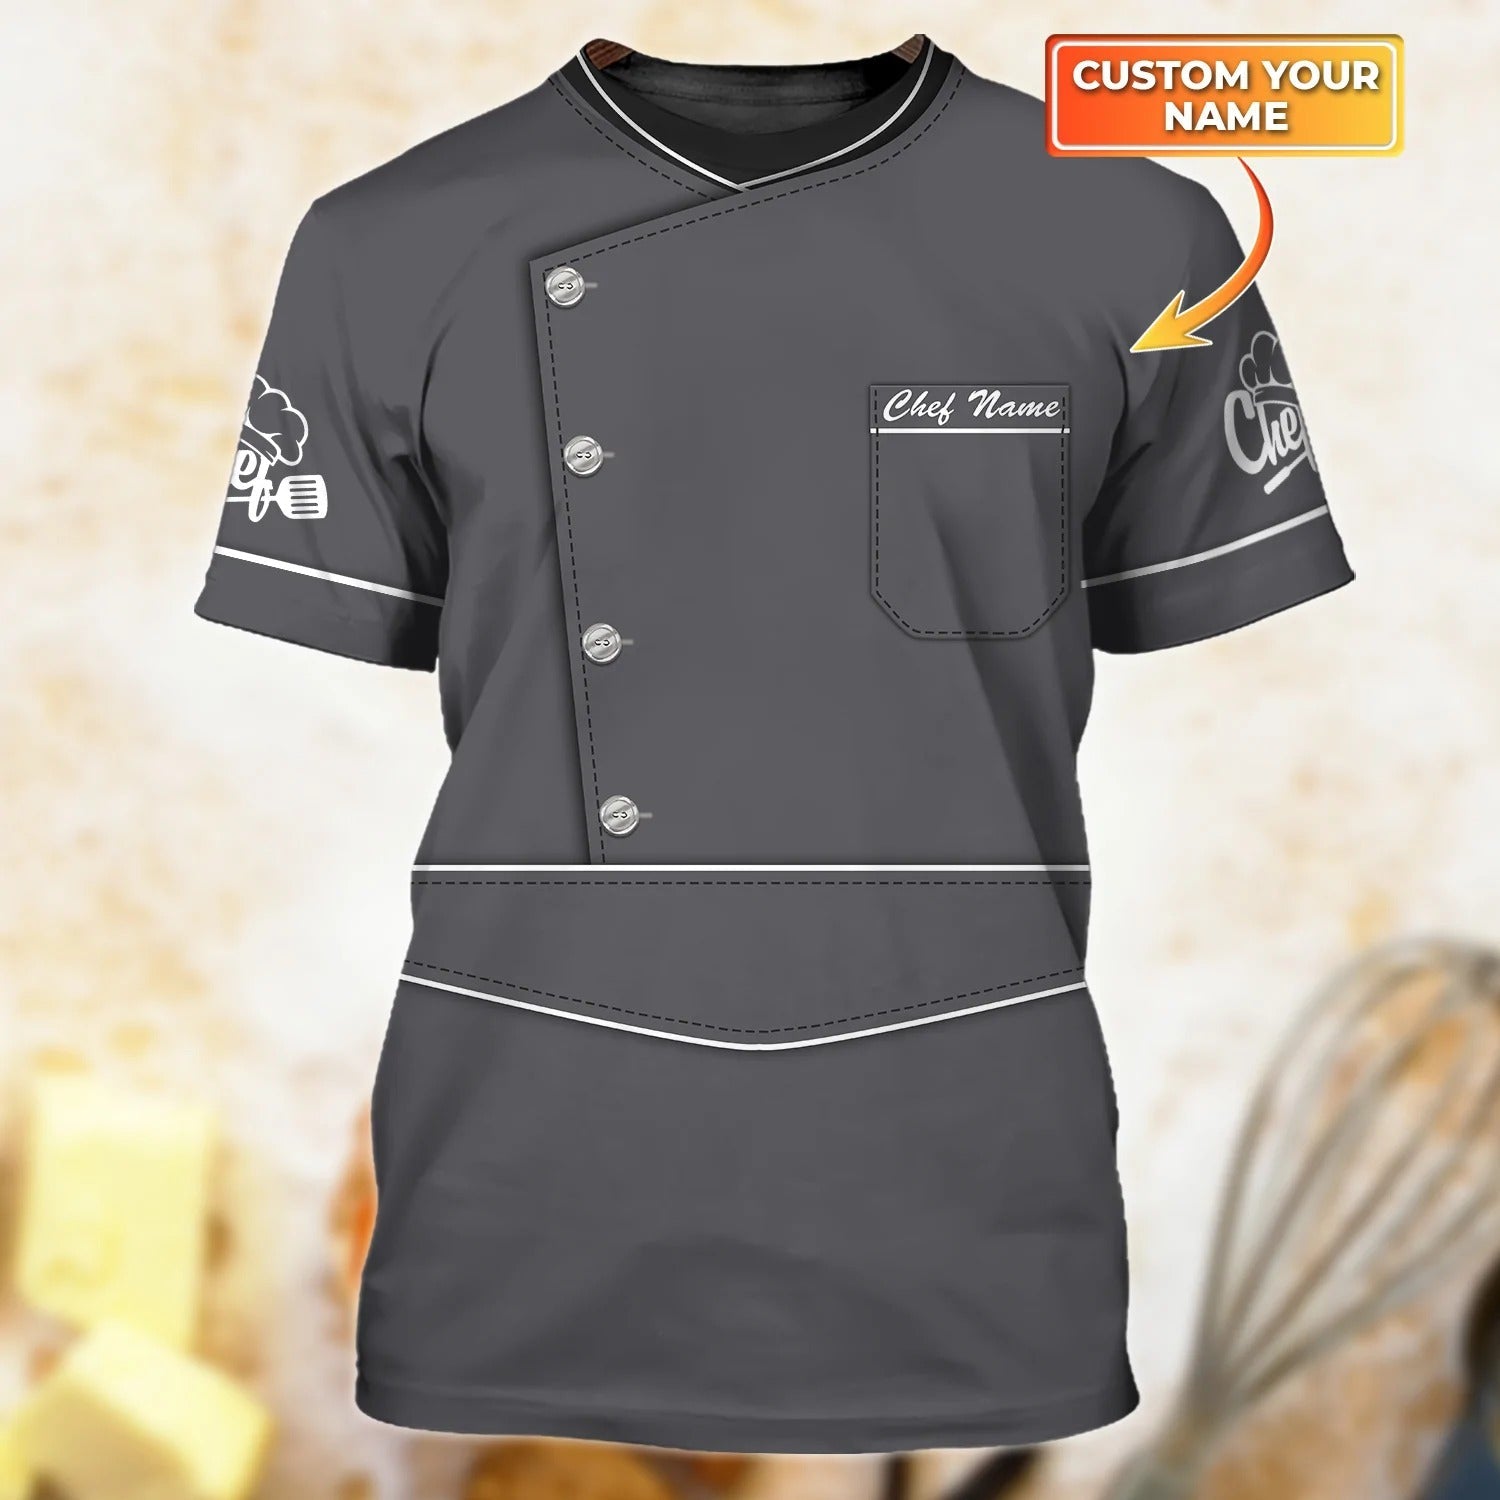 Custom Name 3D T Shirt For Master Chef/ Dad Chef Shirt/ Present To Master Chef/ Shirt For Chef